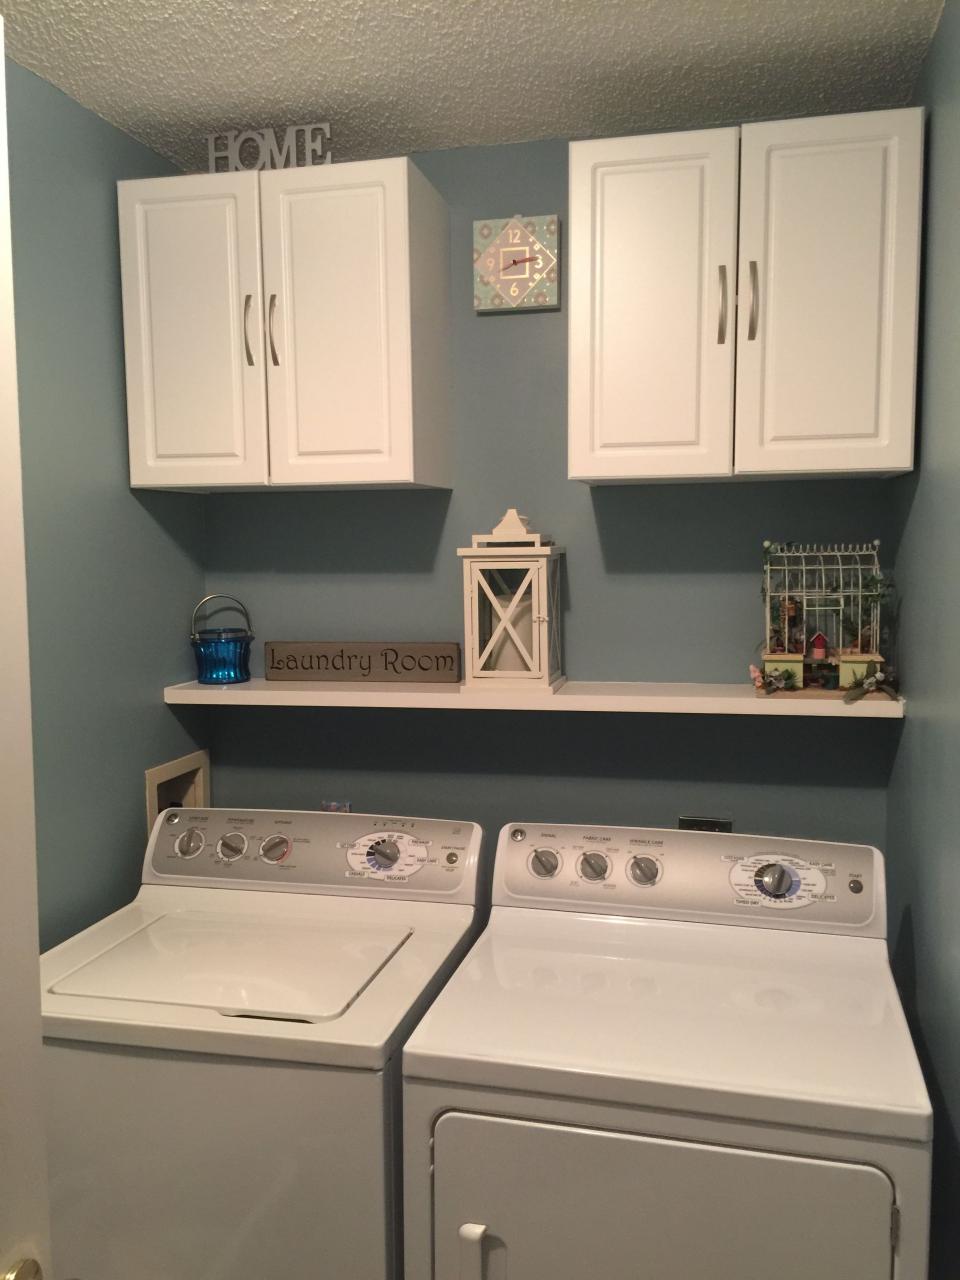 Laundry Room After paint and adding of and floating shelf